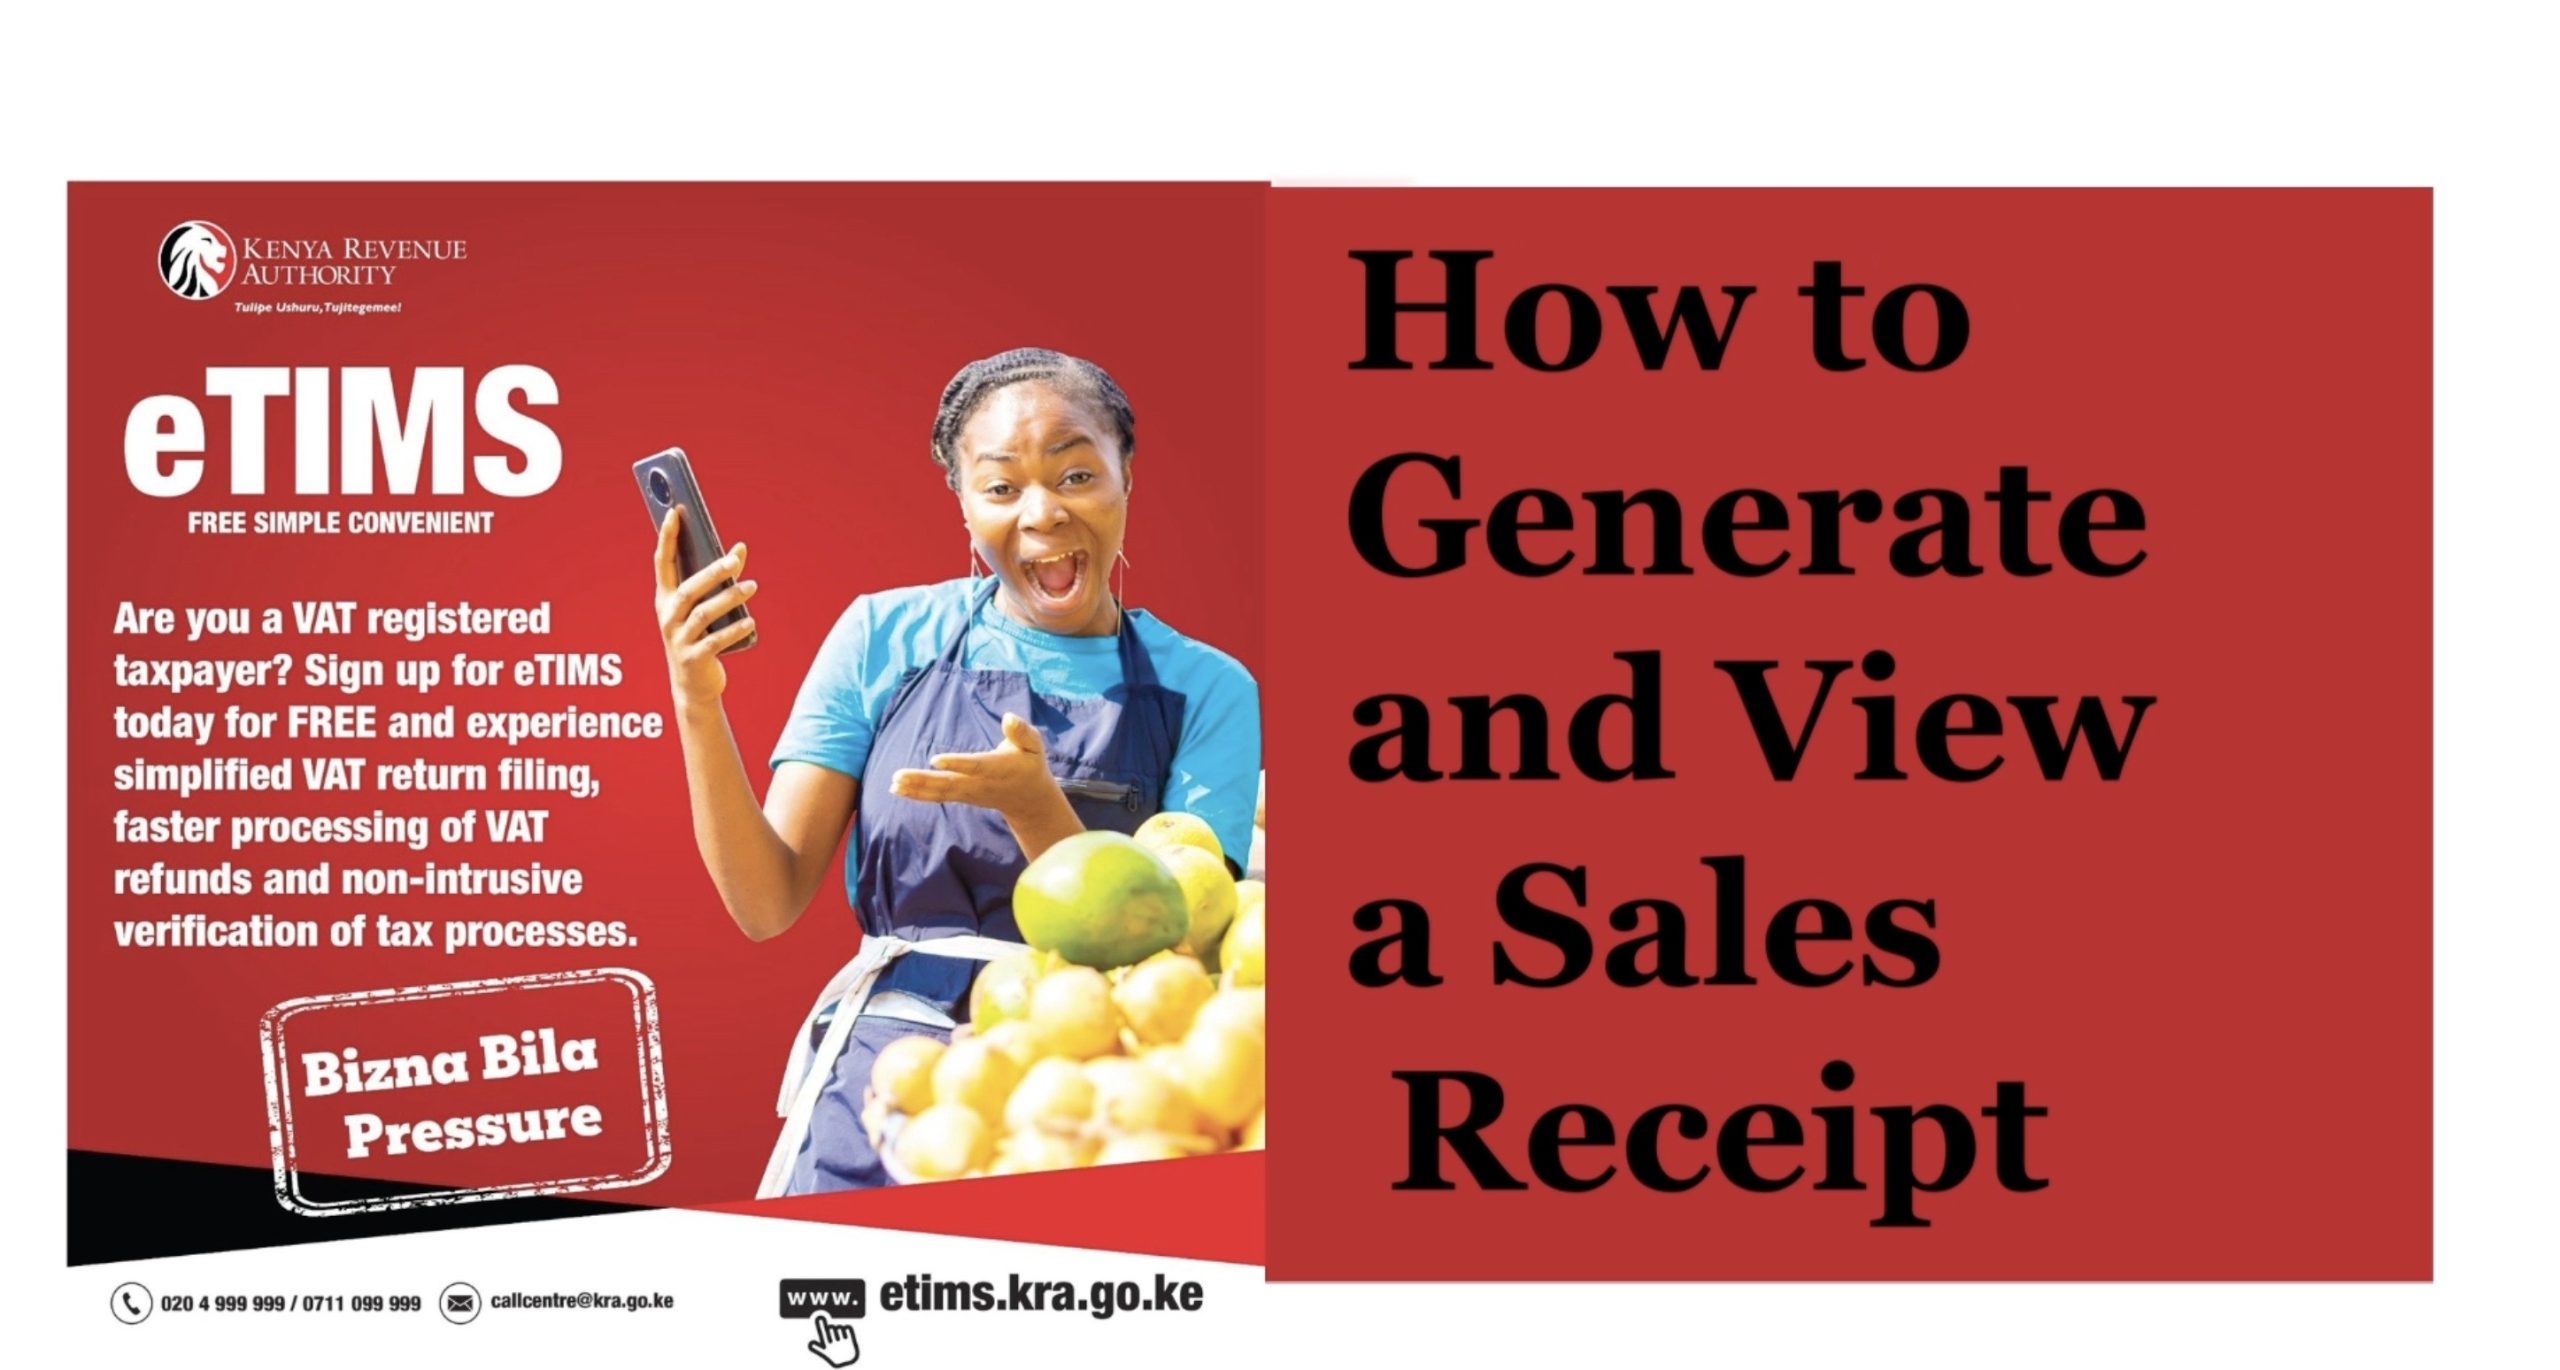 eTIMS: HOW TO GENERATE AND VIEW A SALES RECEIPT | Service traders only